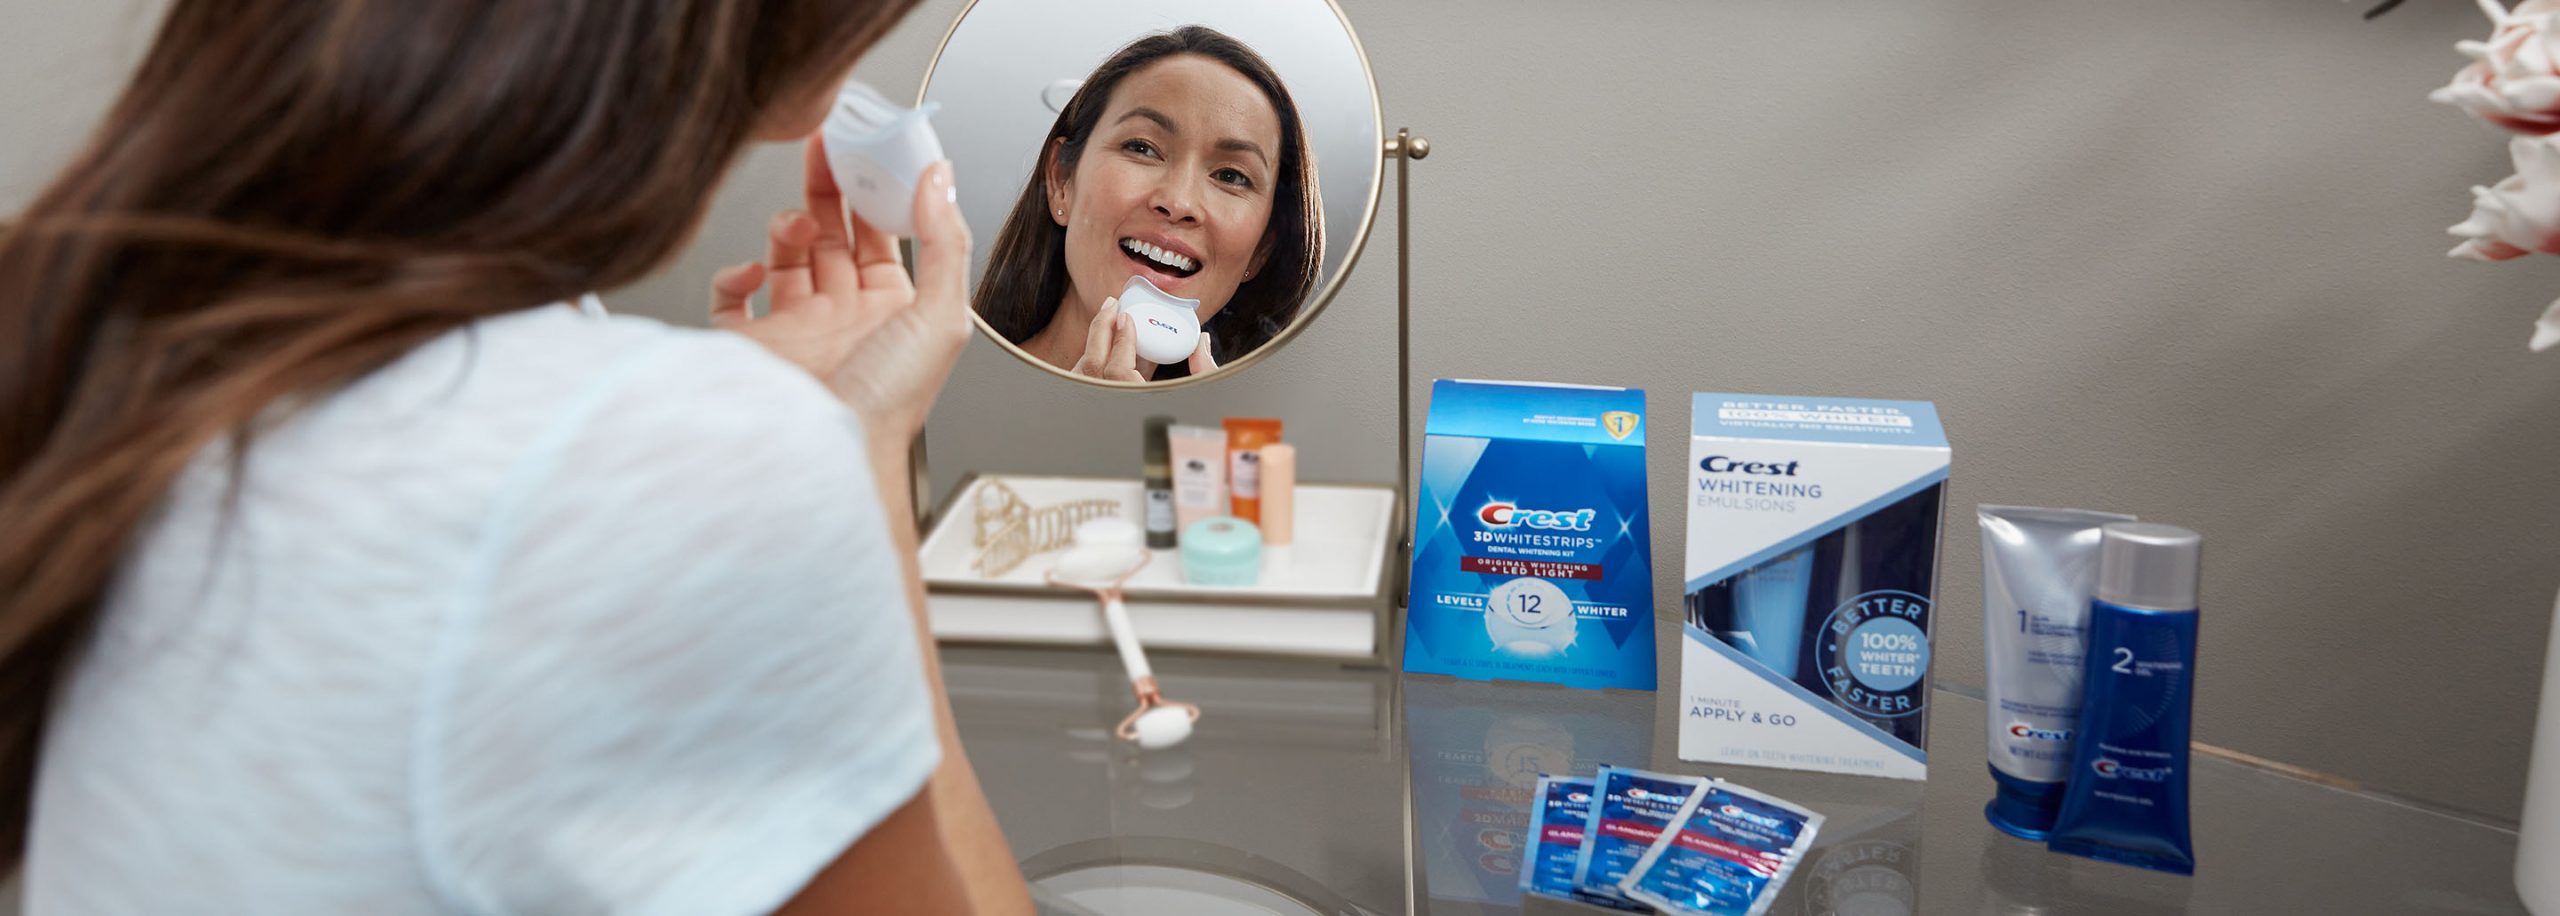 Are Teeth Whitening Strip Gels Safe? Testing Out Coconut Oil Teeth Whitening Gel Strips